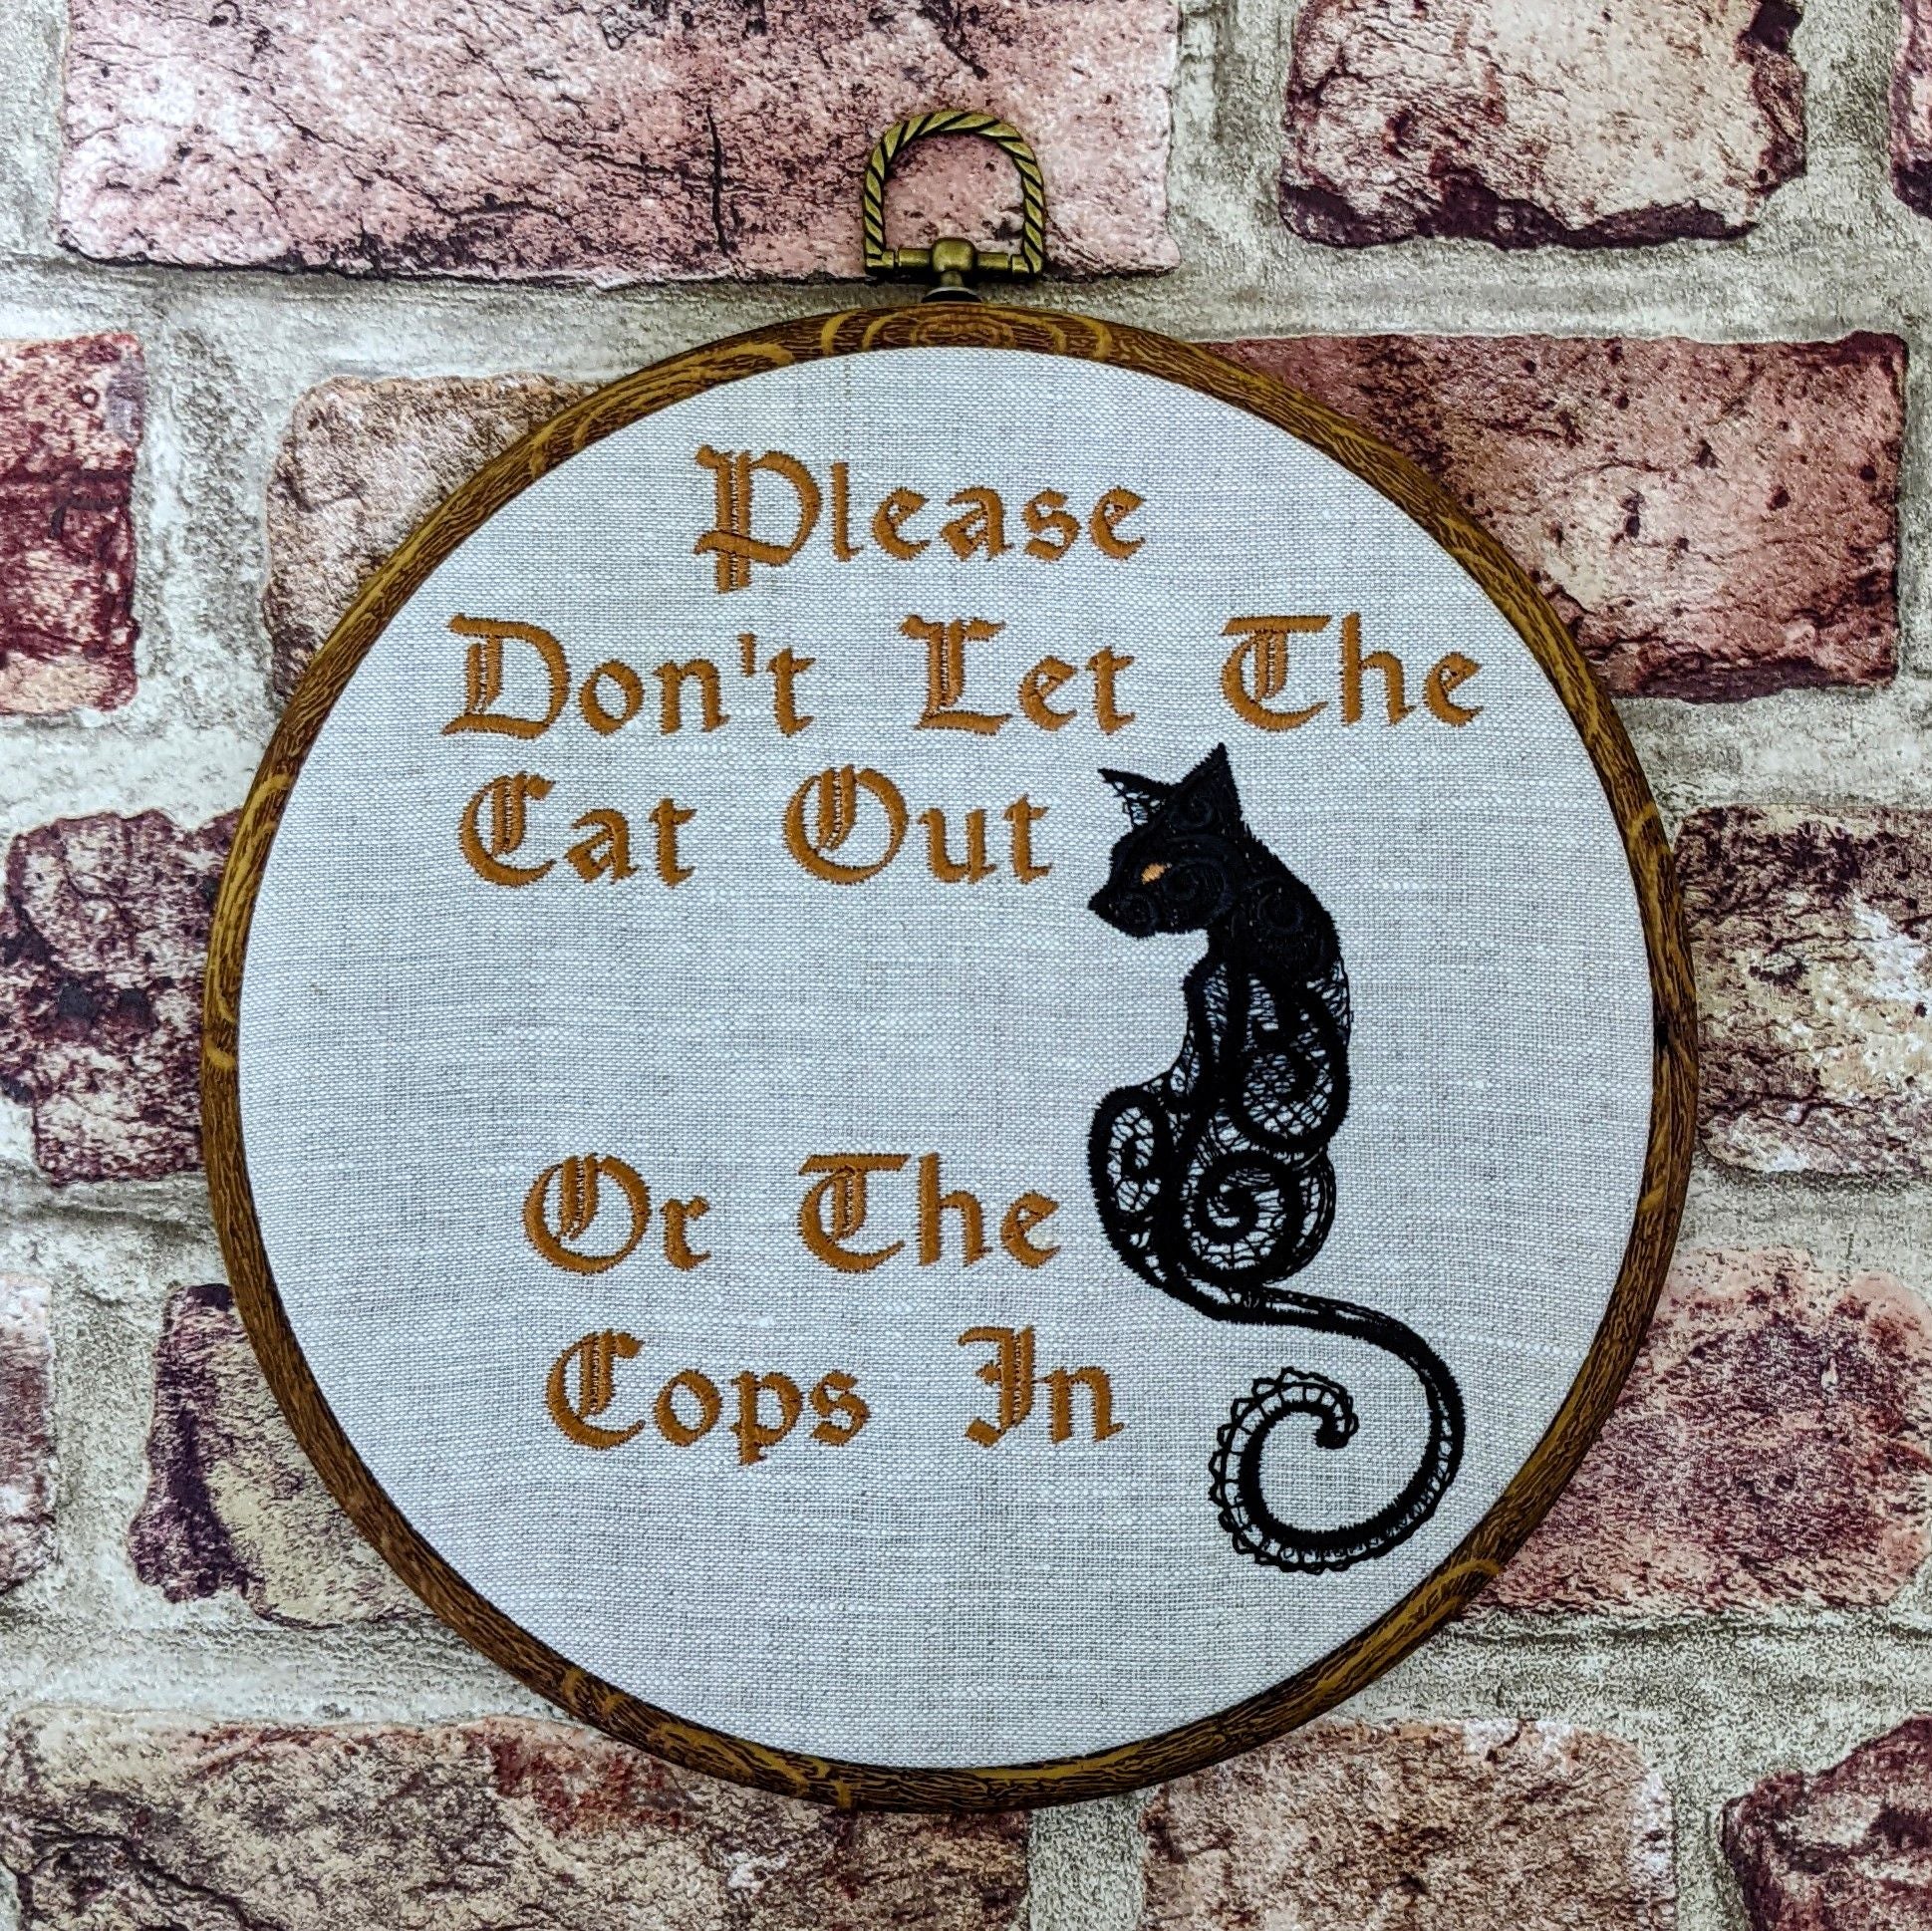 Please don't let the cat out or the cops in. Machine embroidery 8" hoop art